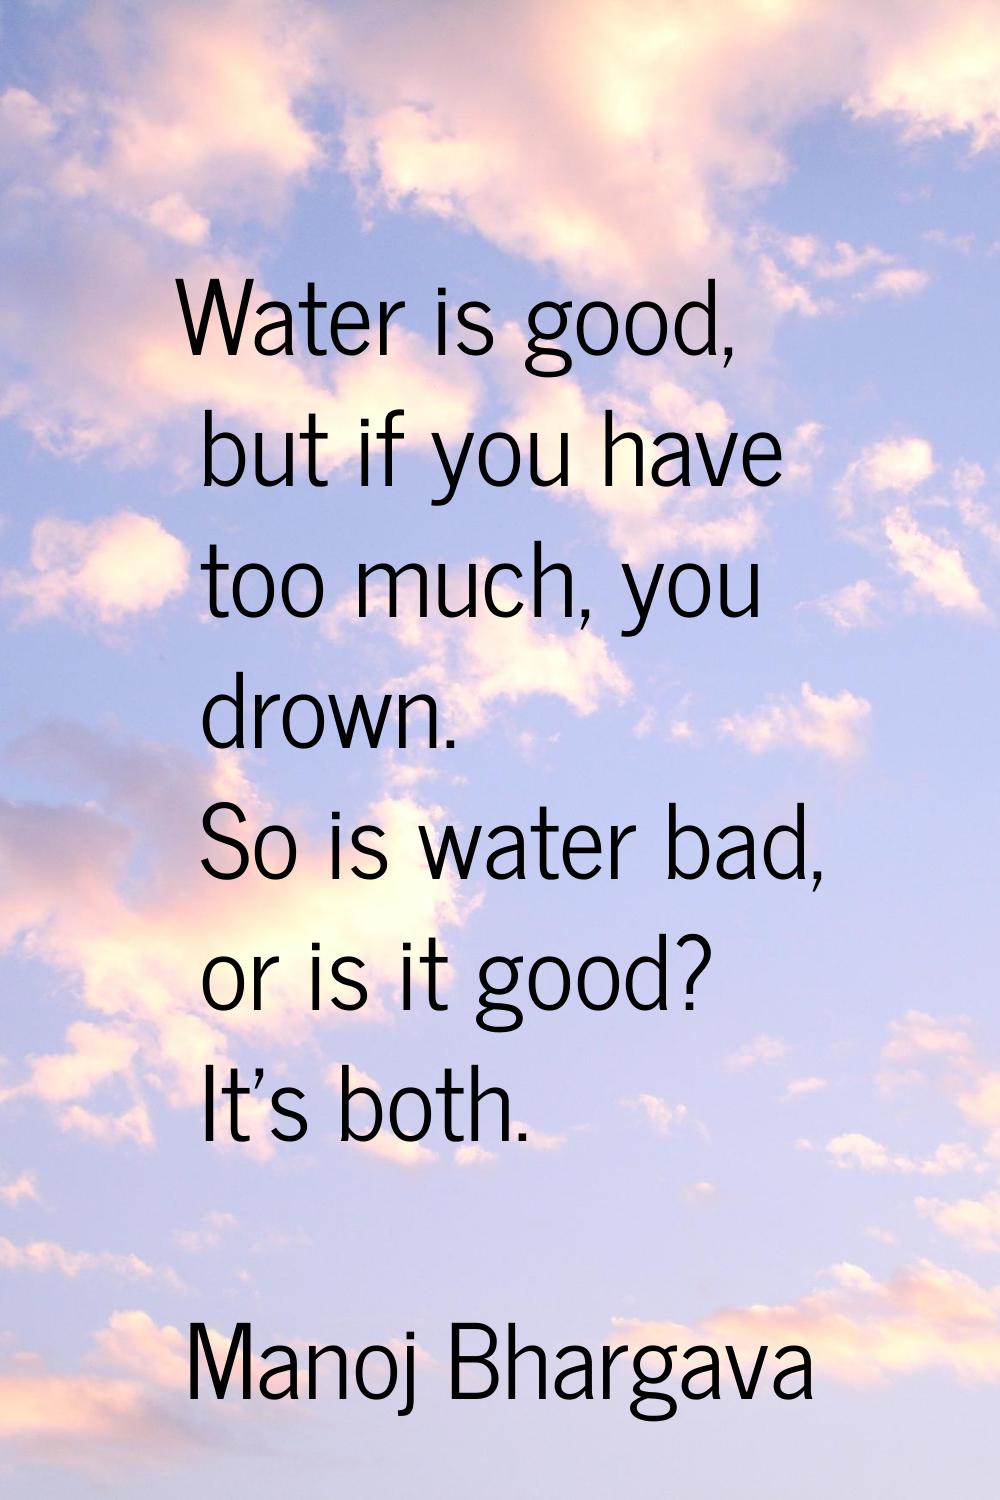 Water is good, but if you have too much, you drown. So is water bad, or is it good? It's both.